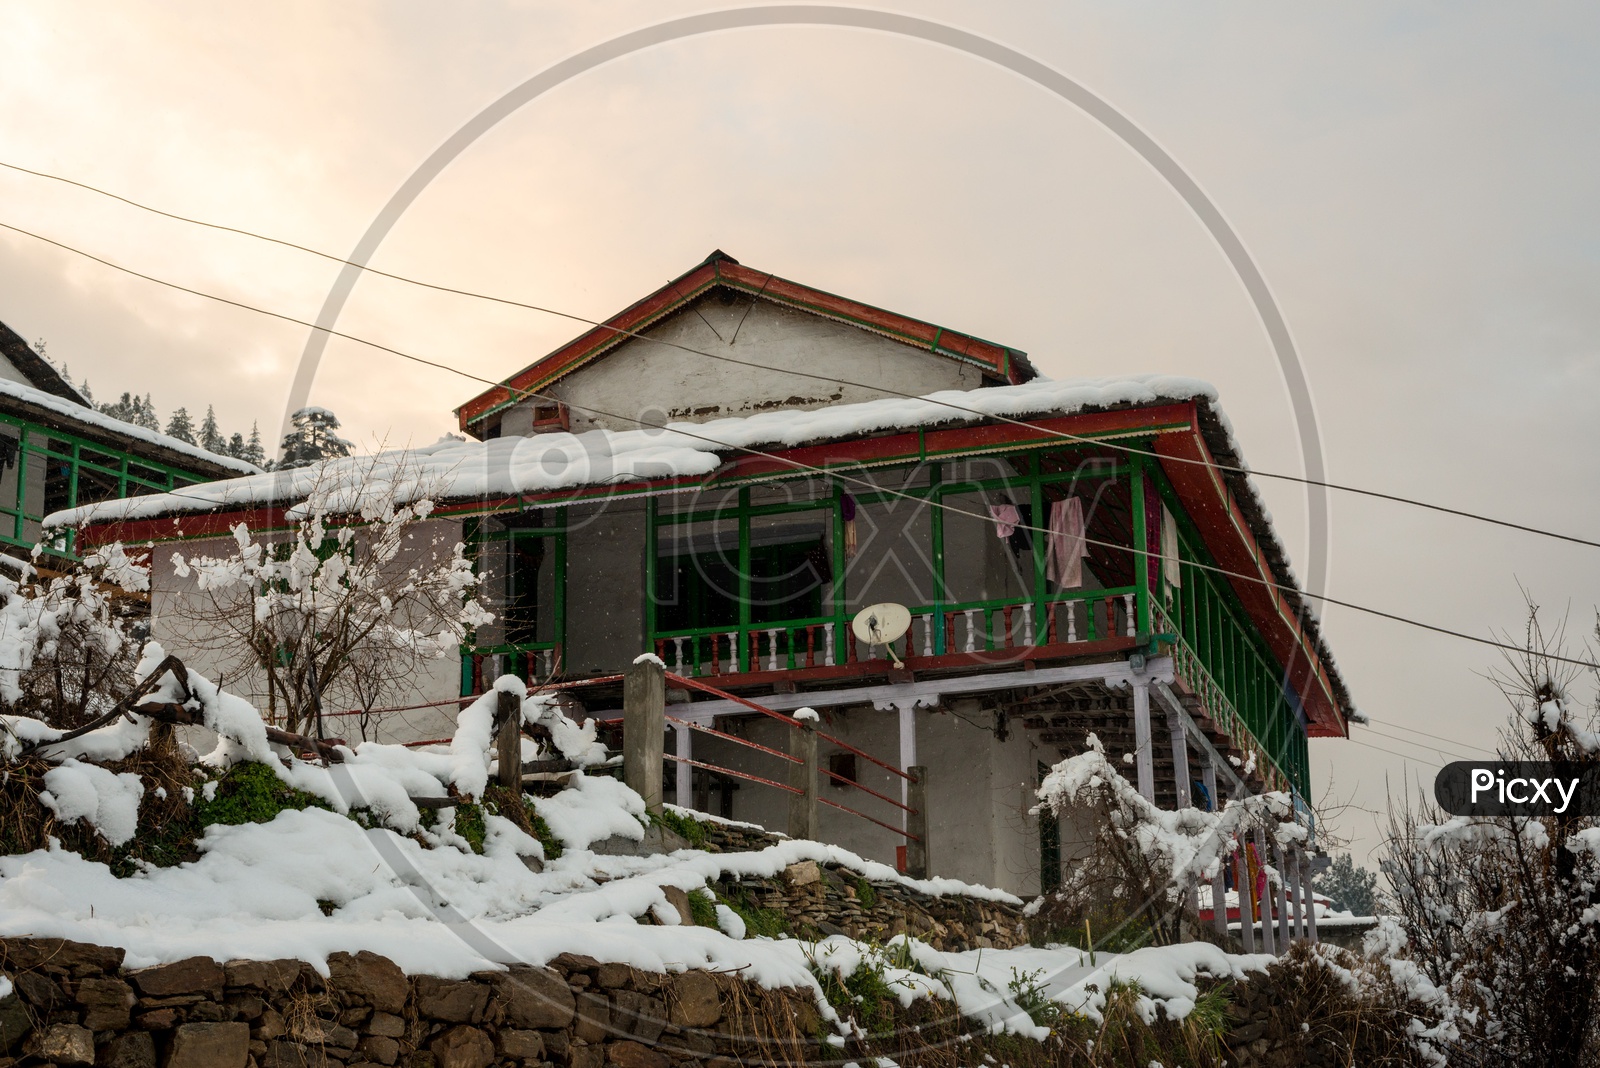 Wooden House of Himachal pradesh Covered with Snow in Winters